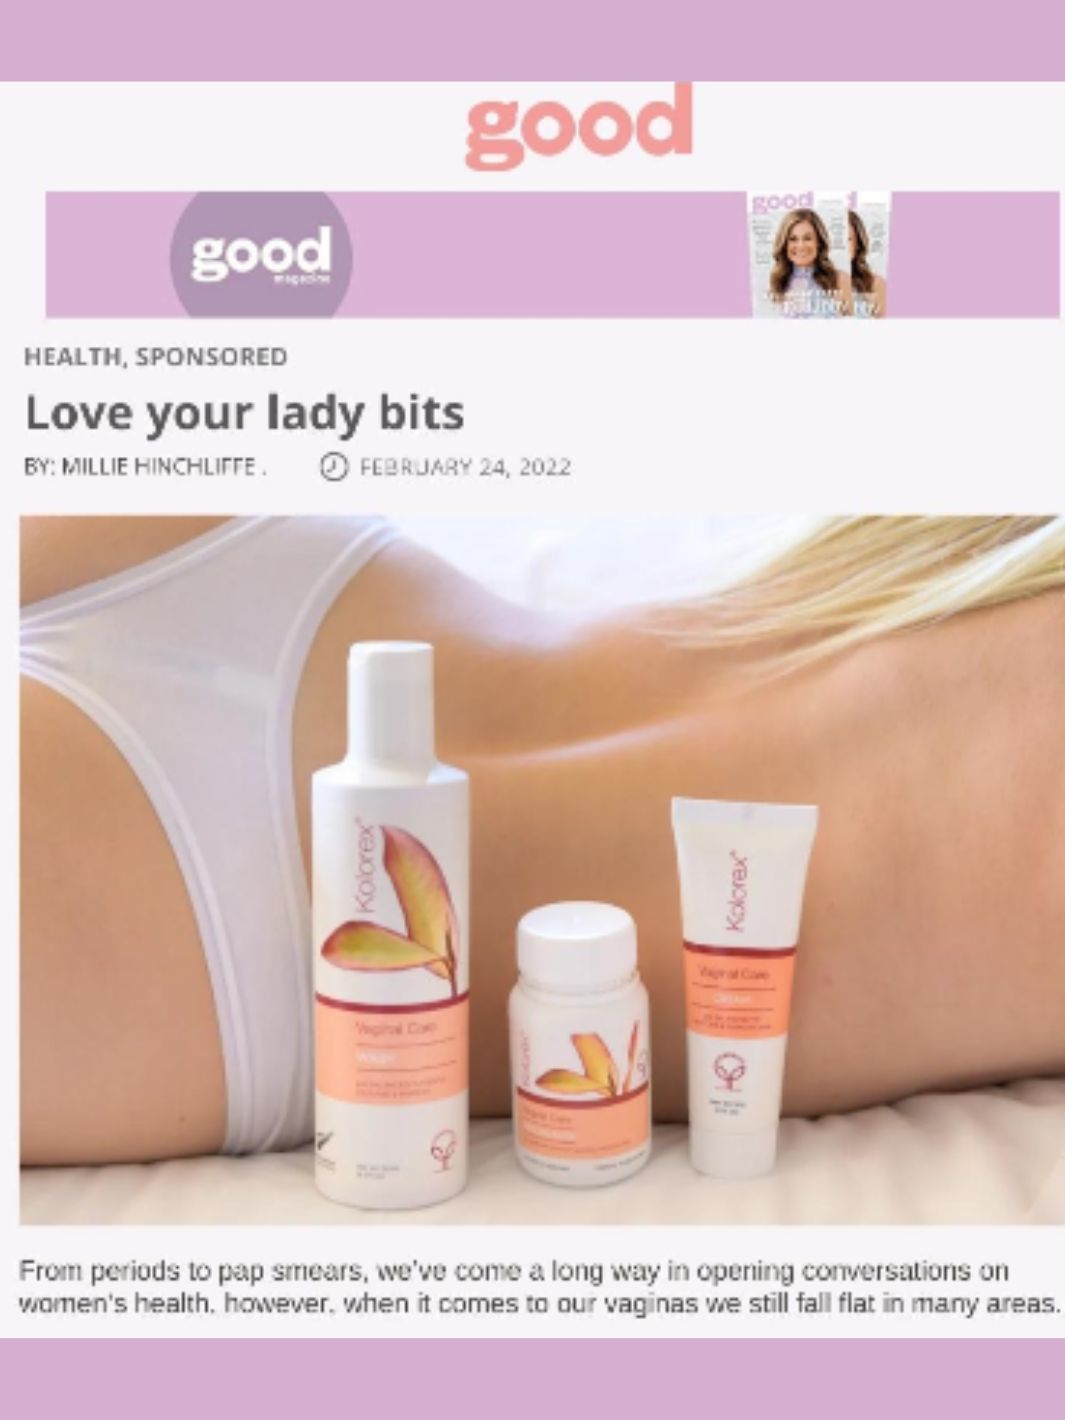 News article referencing Kolorex vaginal care products